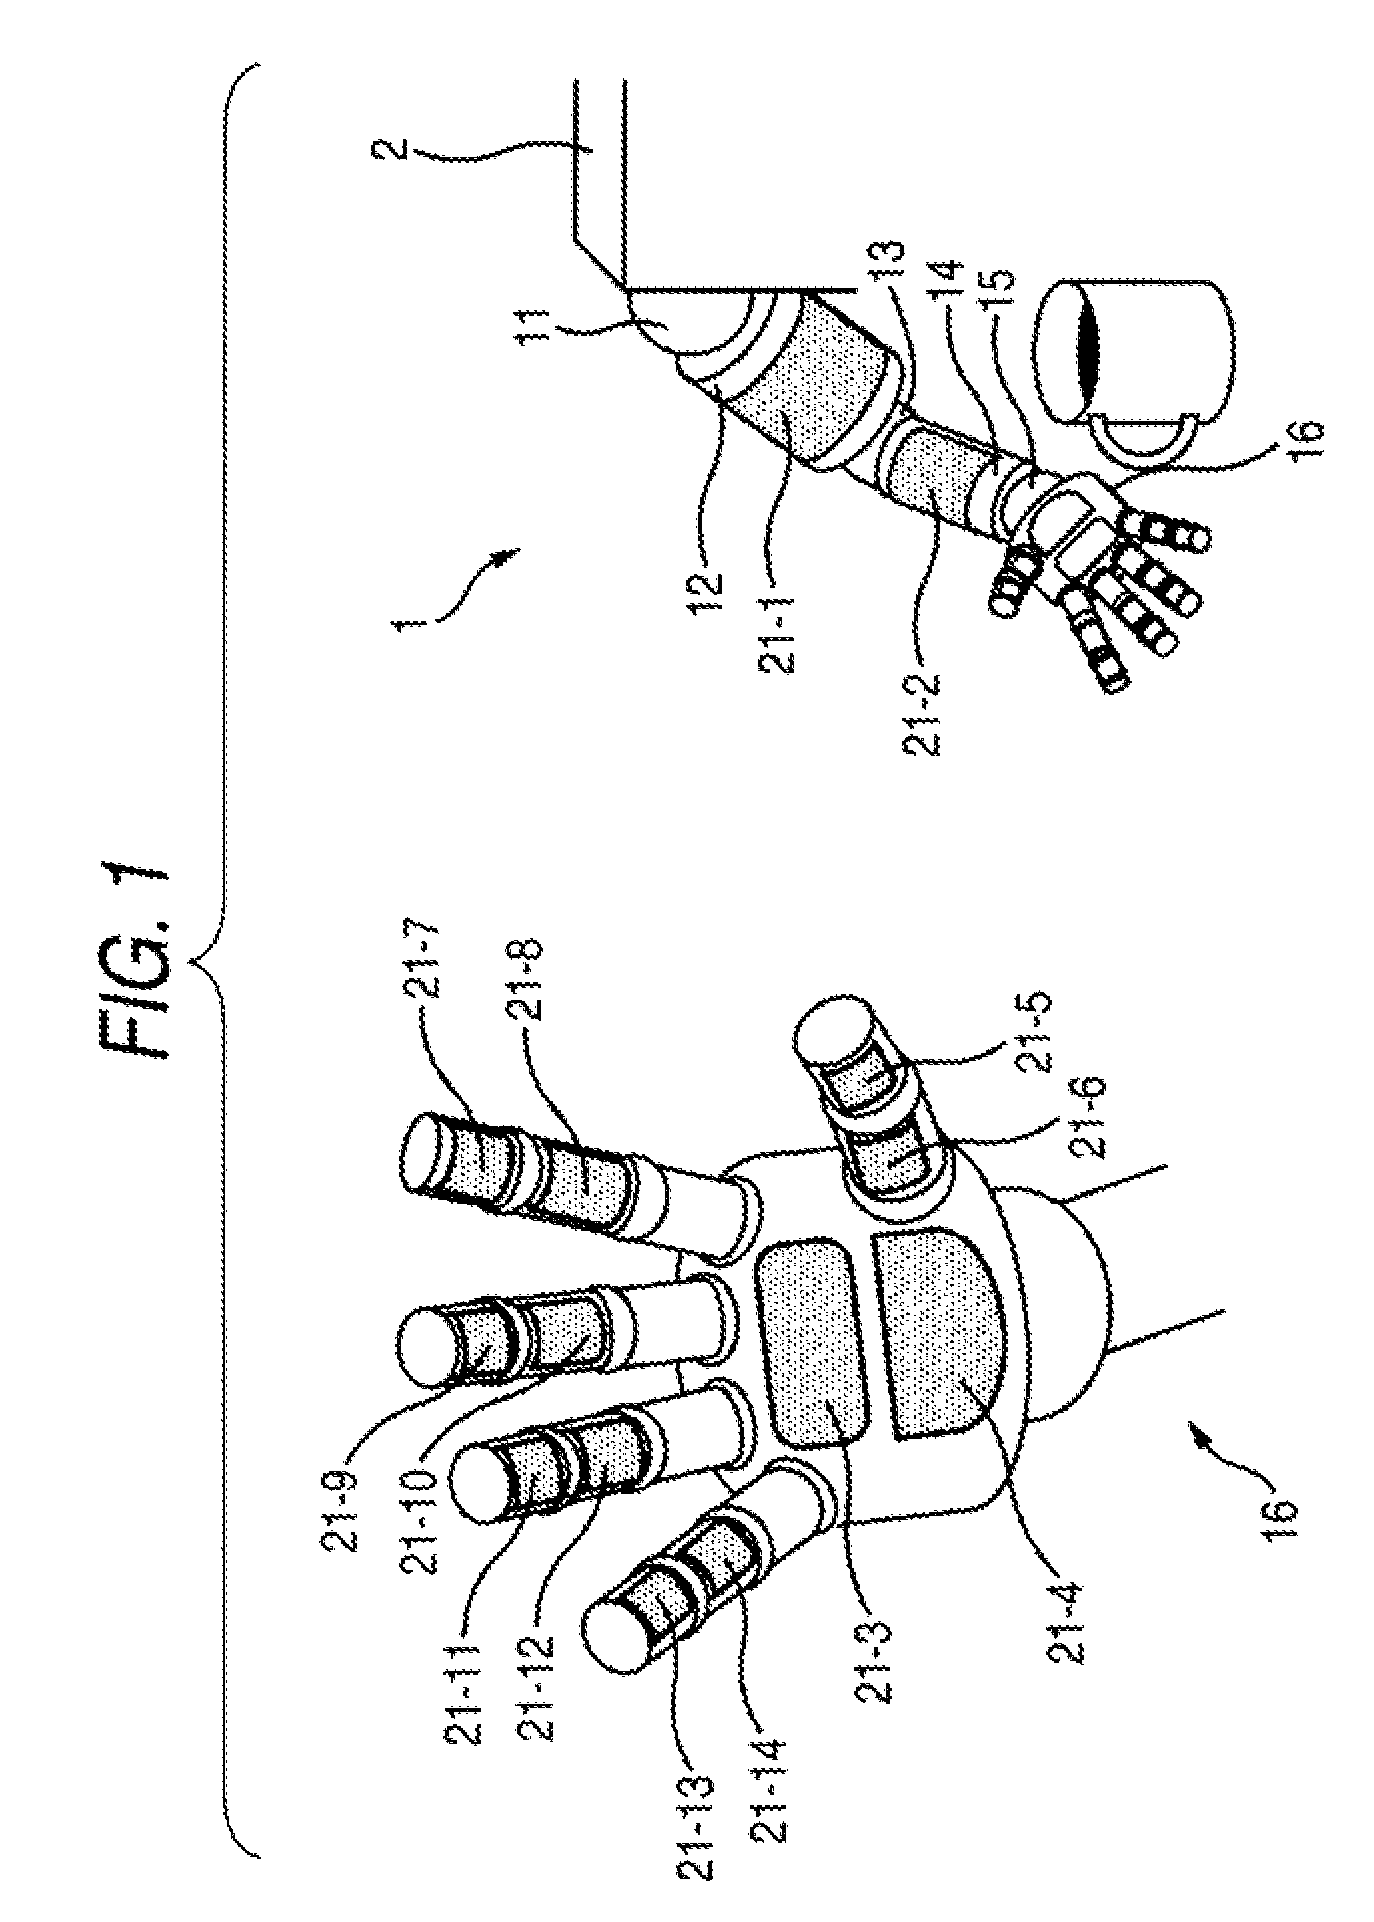 Device and method for detecting deformation of the viscoelastic magnet